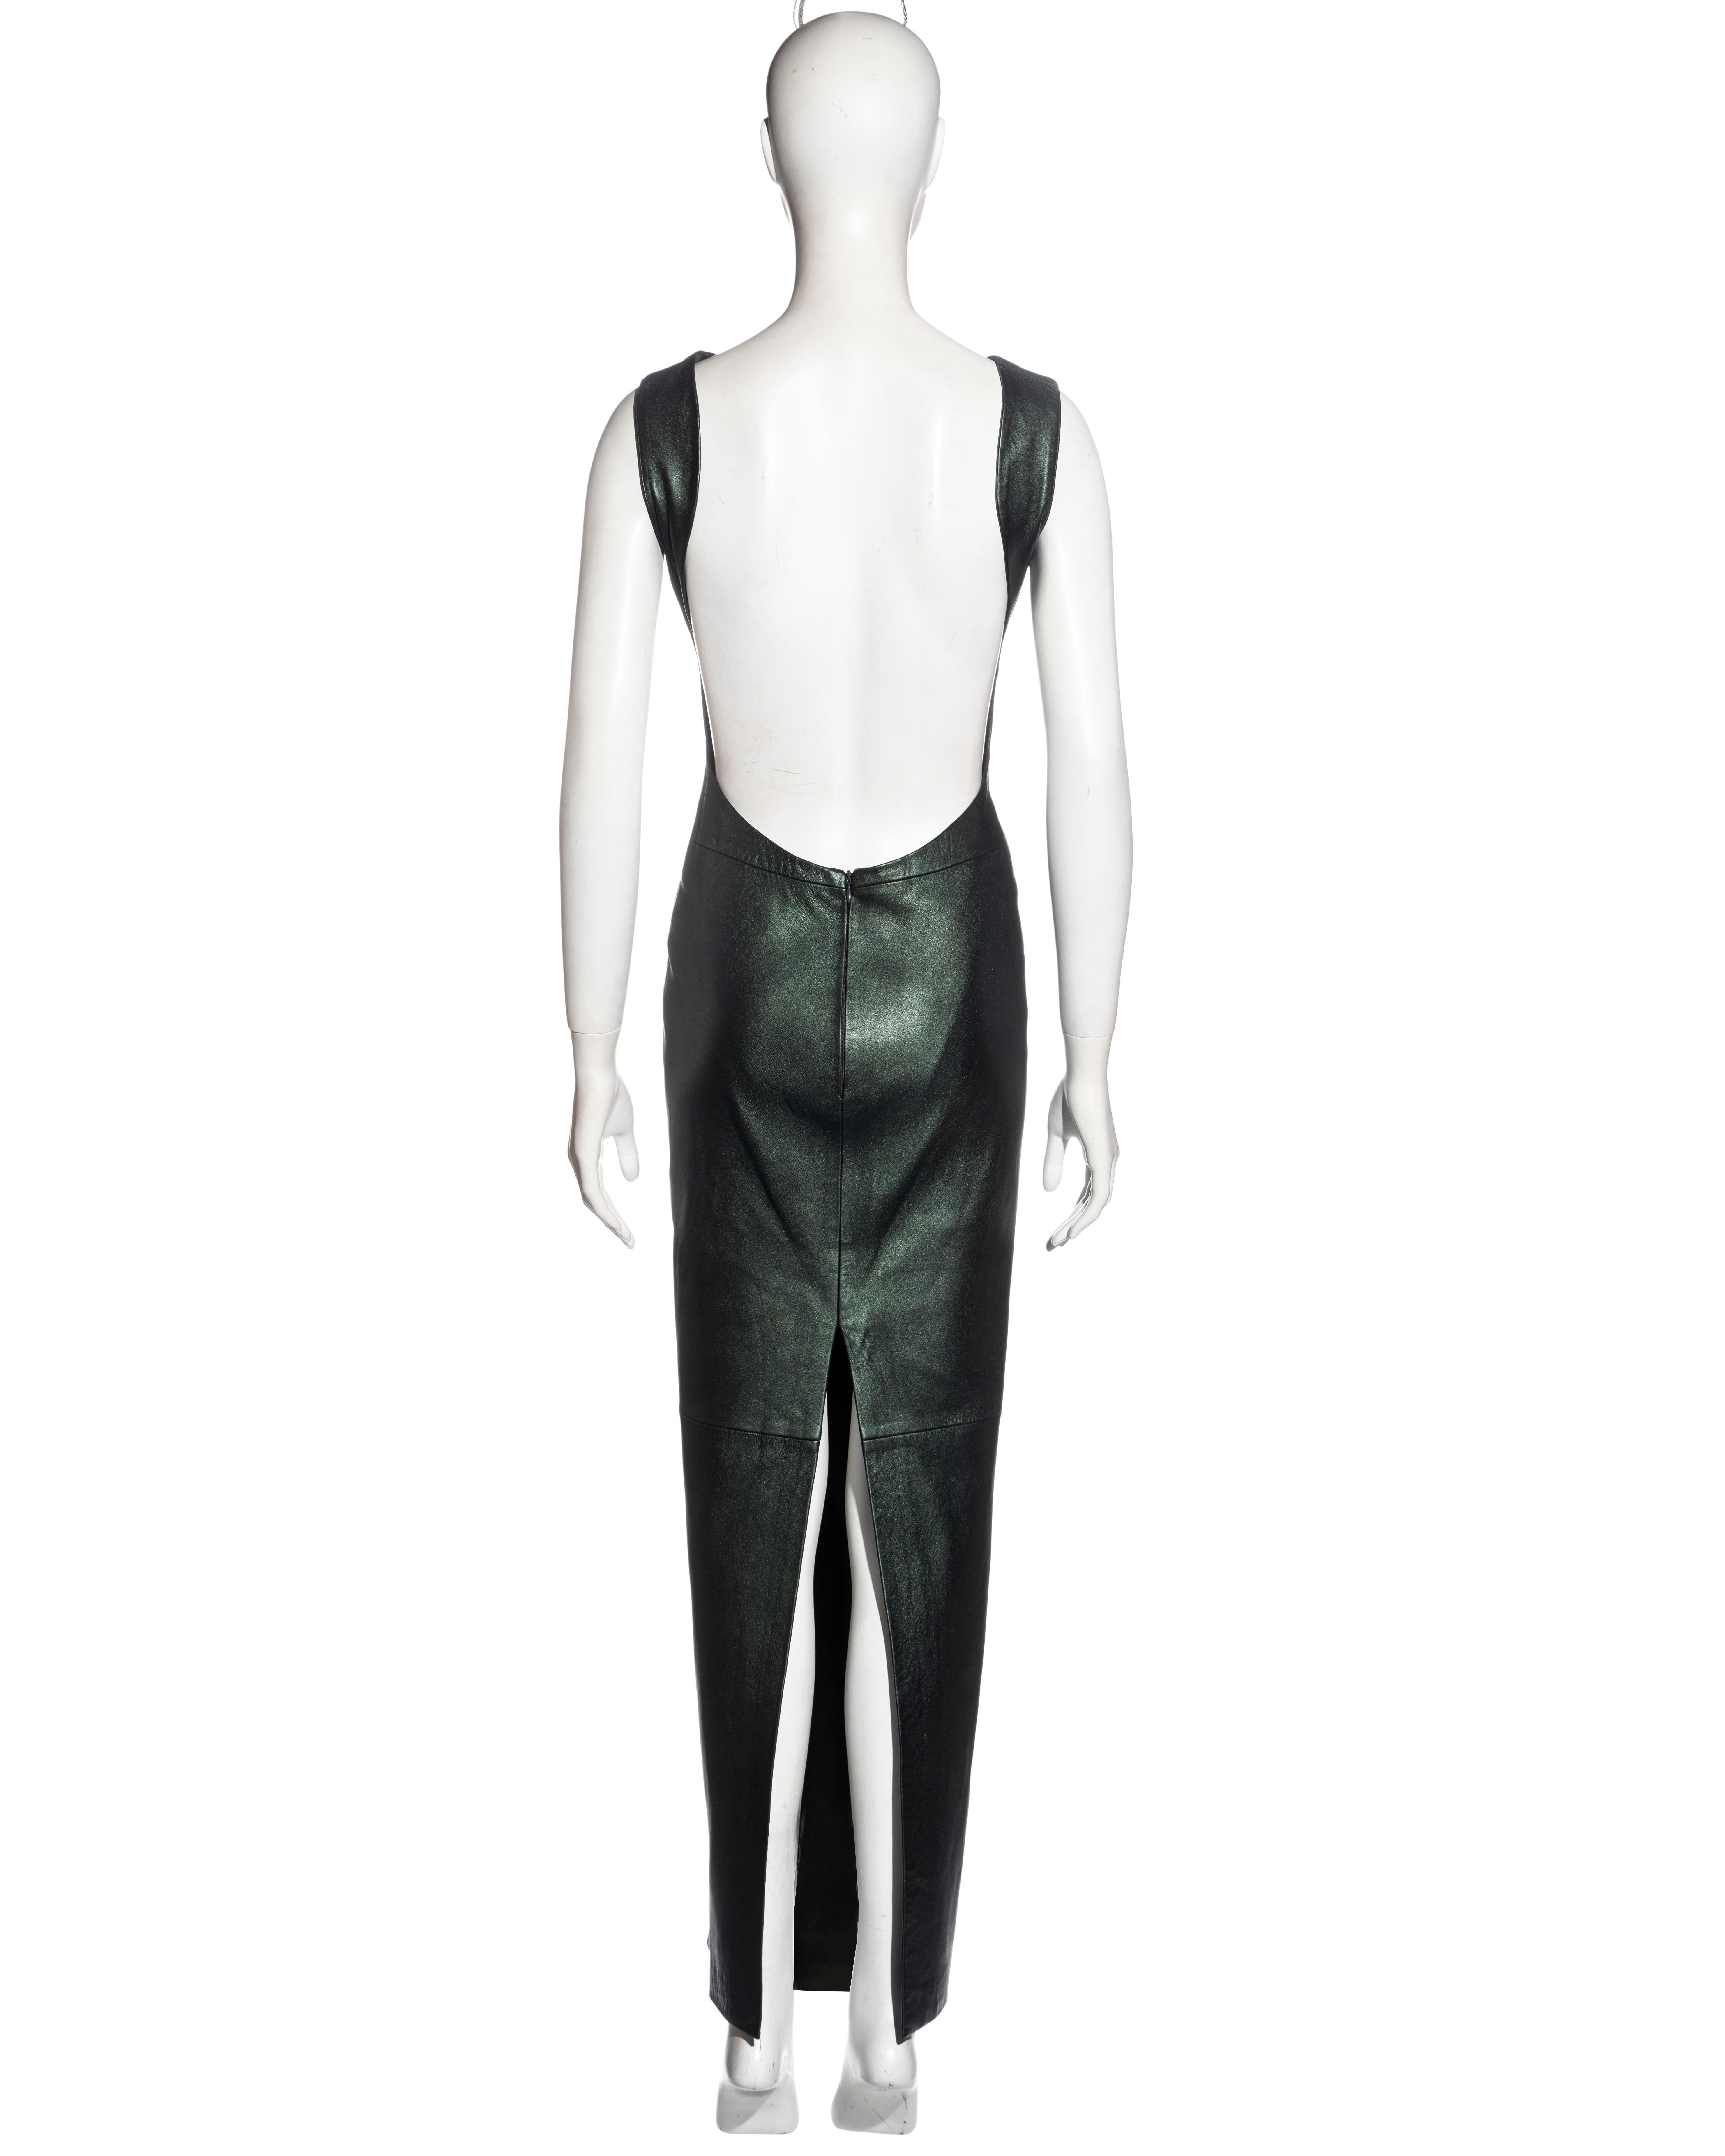 ▪ Mario Valentino green leather full-length dress 
▪ Open back  
▪ Thigh-high back slit  
▪ Boat neck  
▪ IT 42 - FR 38 - UK 10 - US 6 
▪ Fall-Winter 1999 
▪ 100% Leather 
▪ Made in Italy